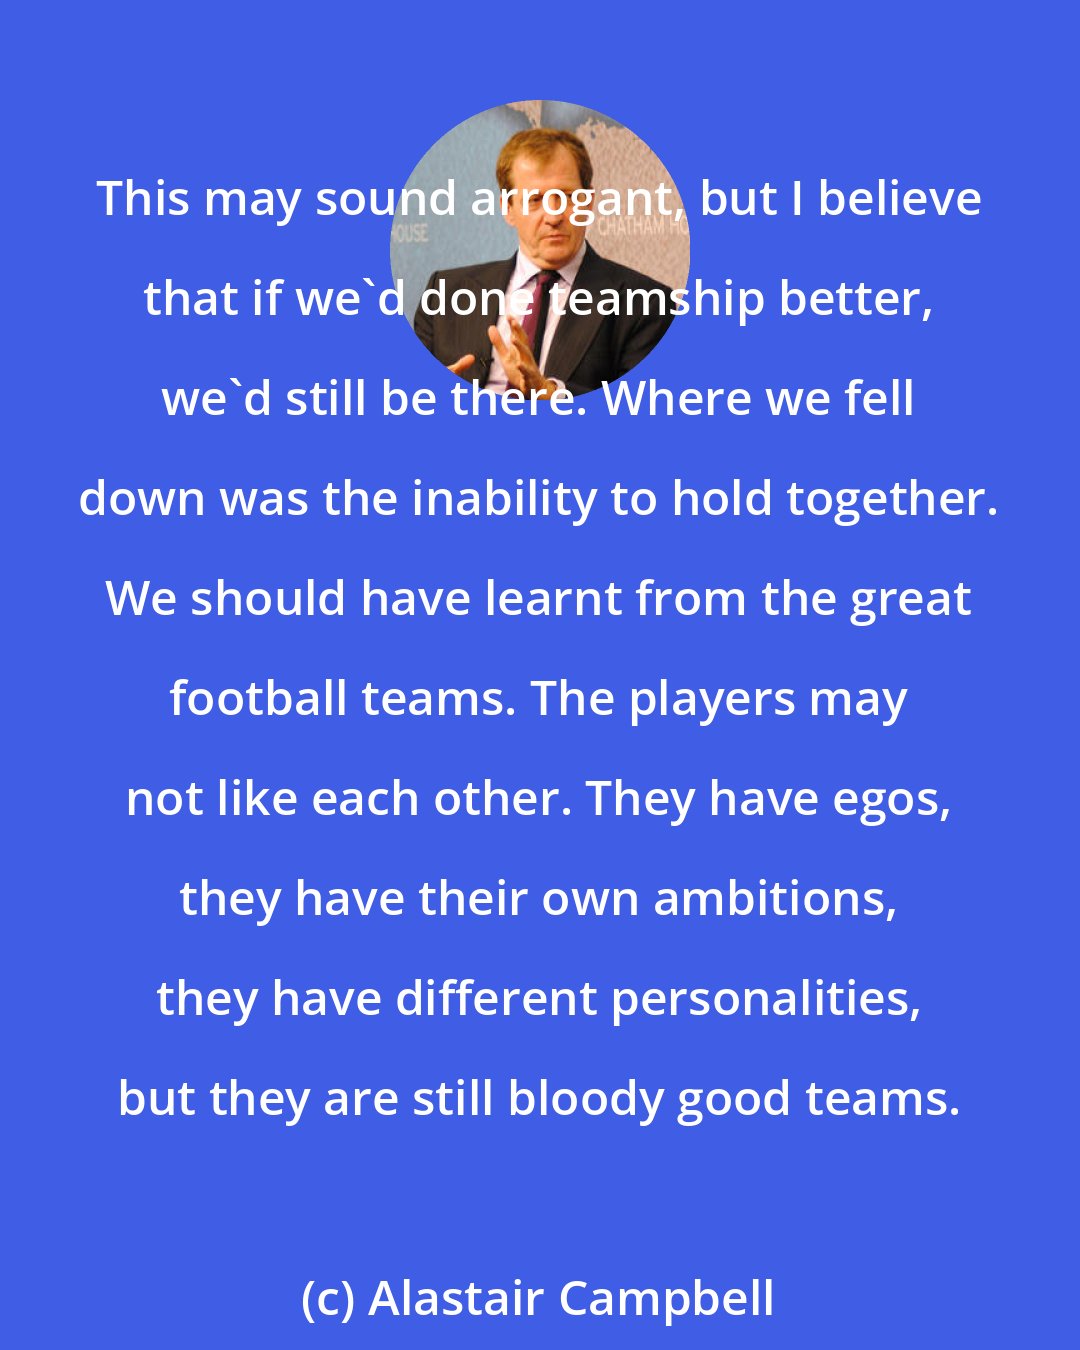 Alastair Campbell: This may sound arrogant, but I believe that if we'd done teamship better, we'd still be there. Where we fell down was the inability to hold together. We should have learnt from the great football teams. The players may not like each other. They have egos, they have their own ambitions, they have different personalities, but they are still bloody good teams.